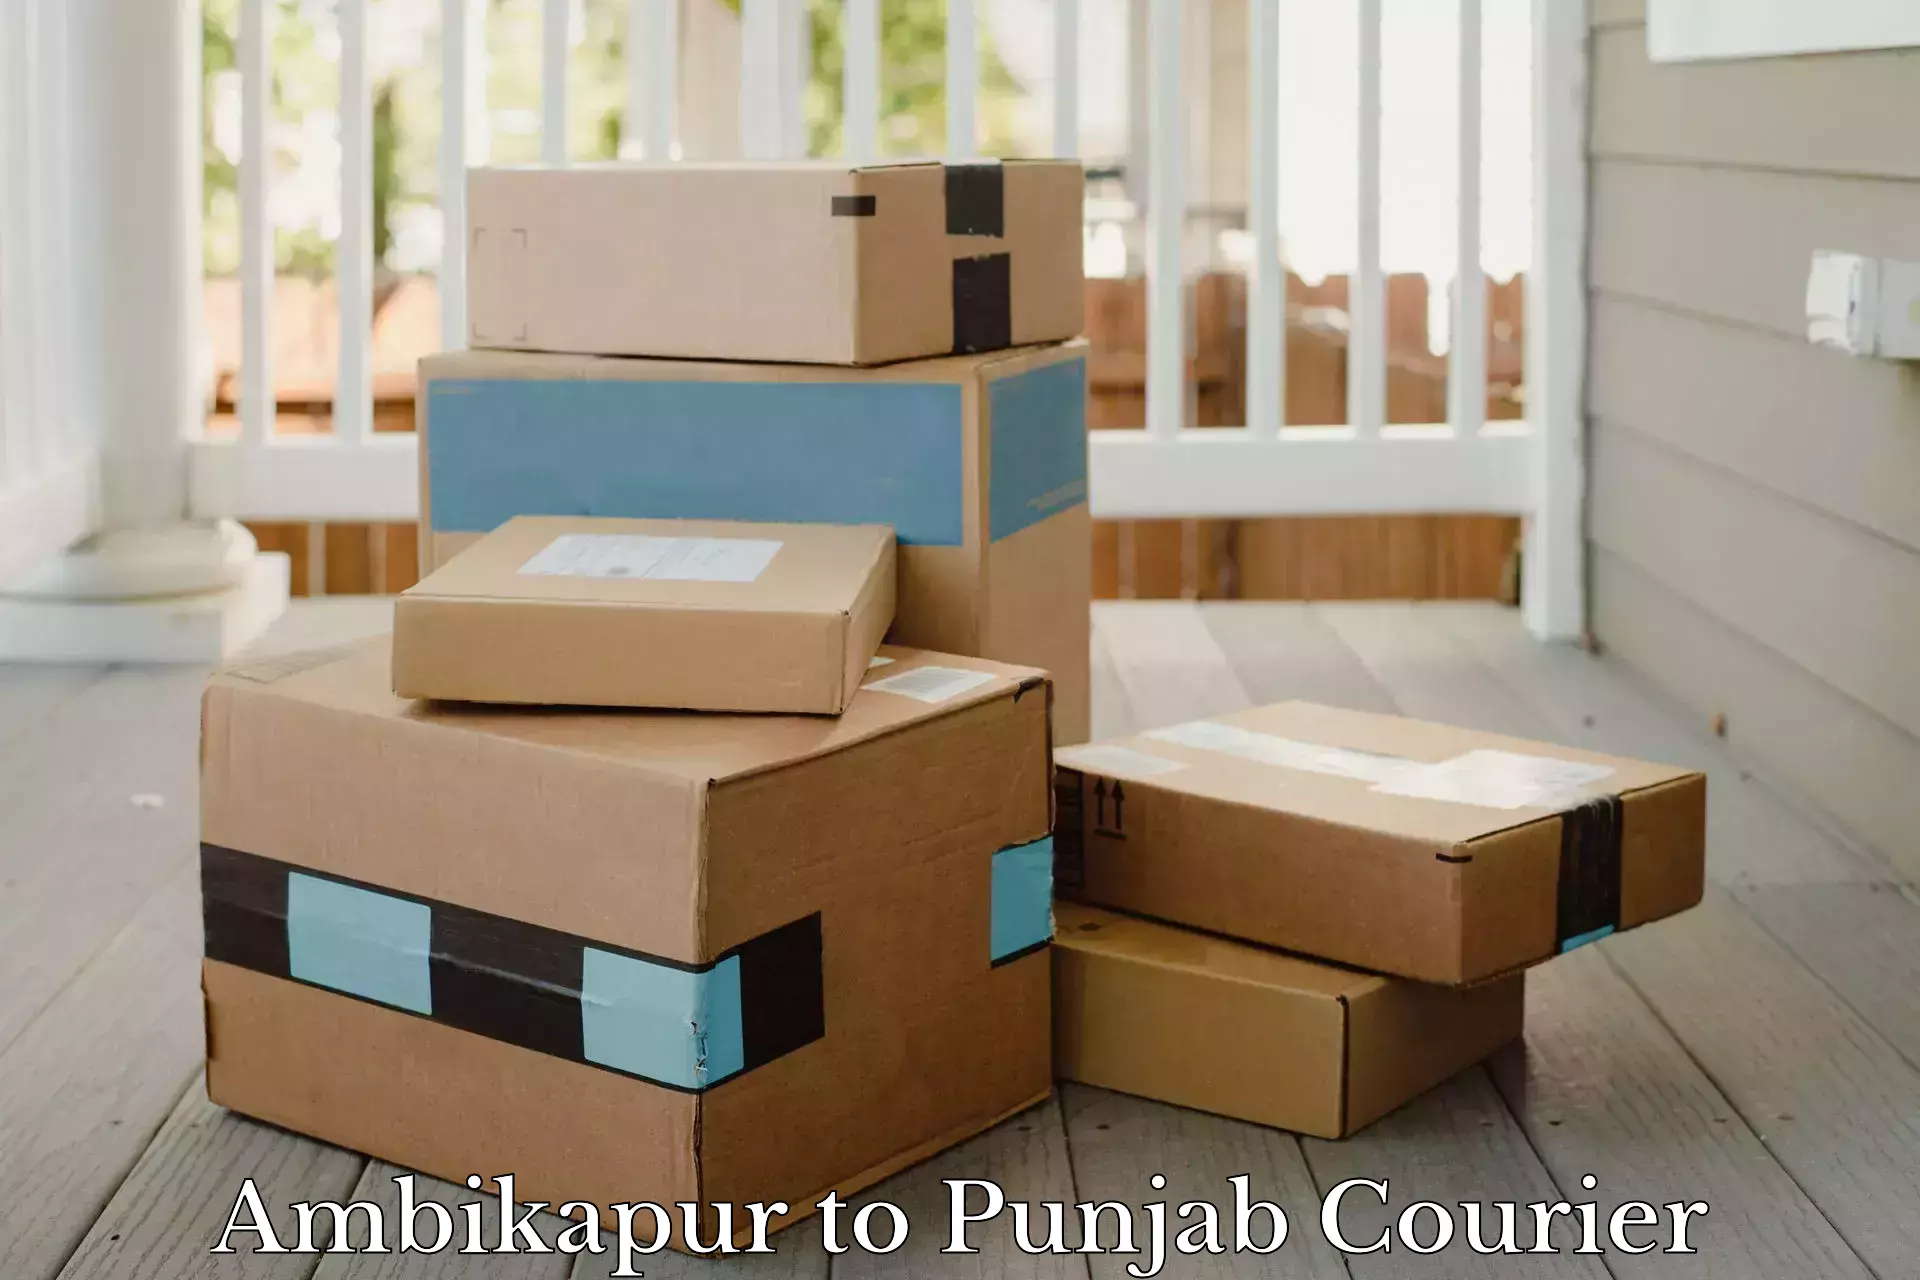 High-priority parcel service Ambikapur to Punjab